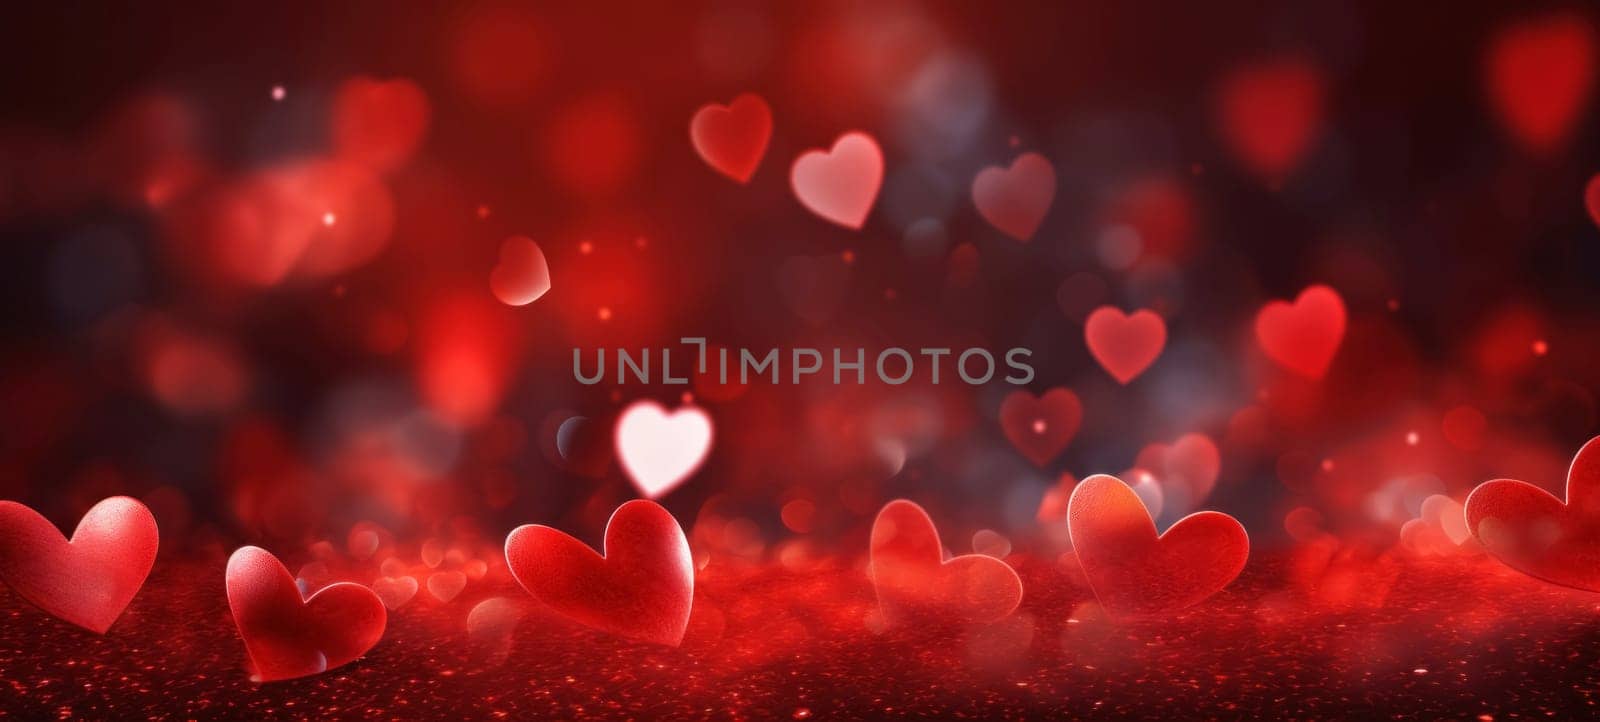 Red background with hearts for Valentine's Day. Abstract horizontal banner or greeting card by andreyz